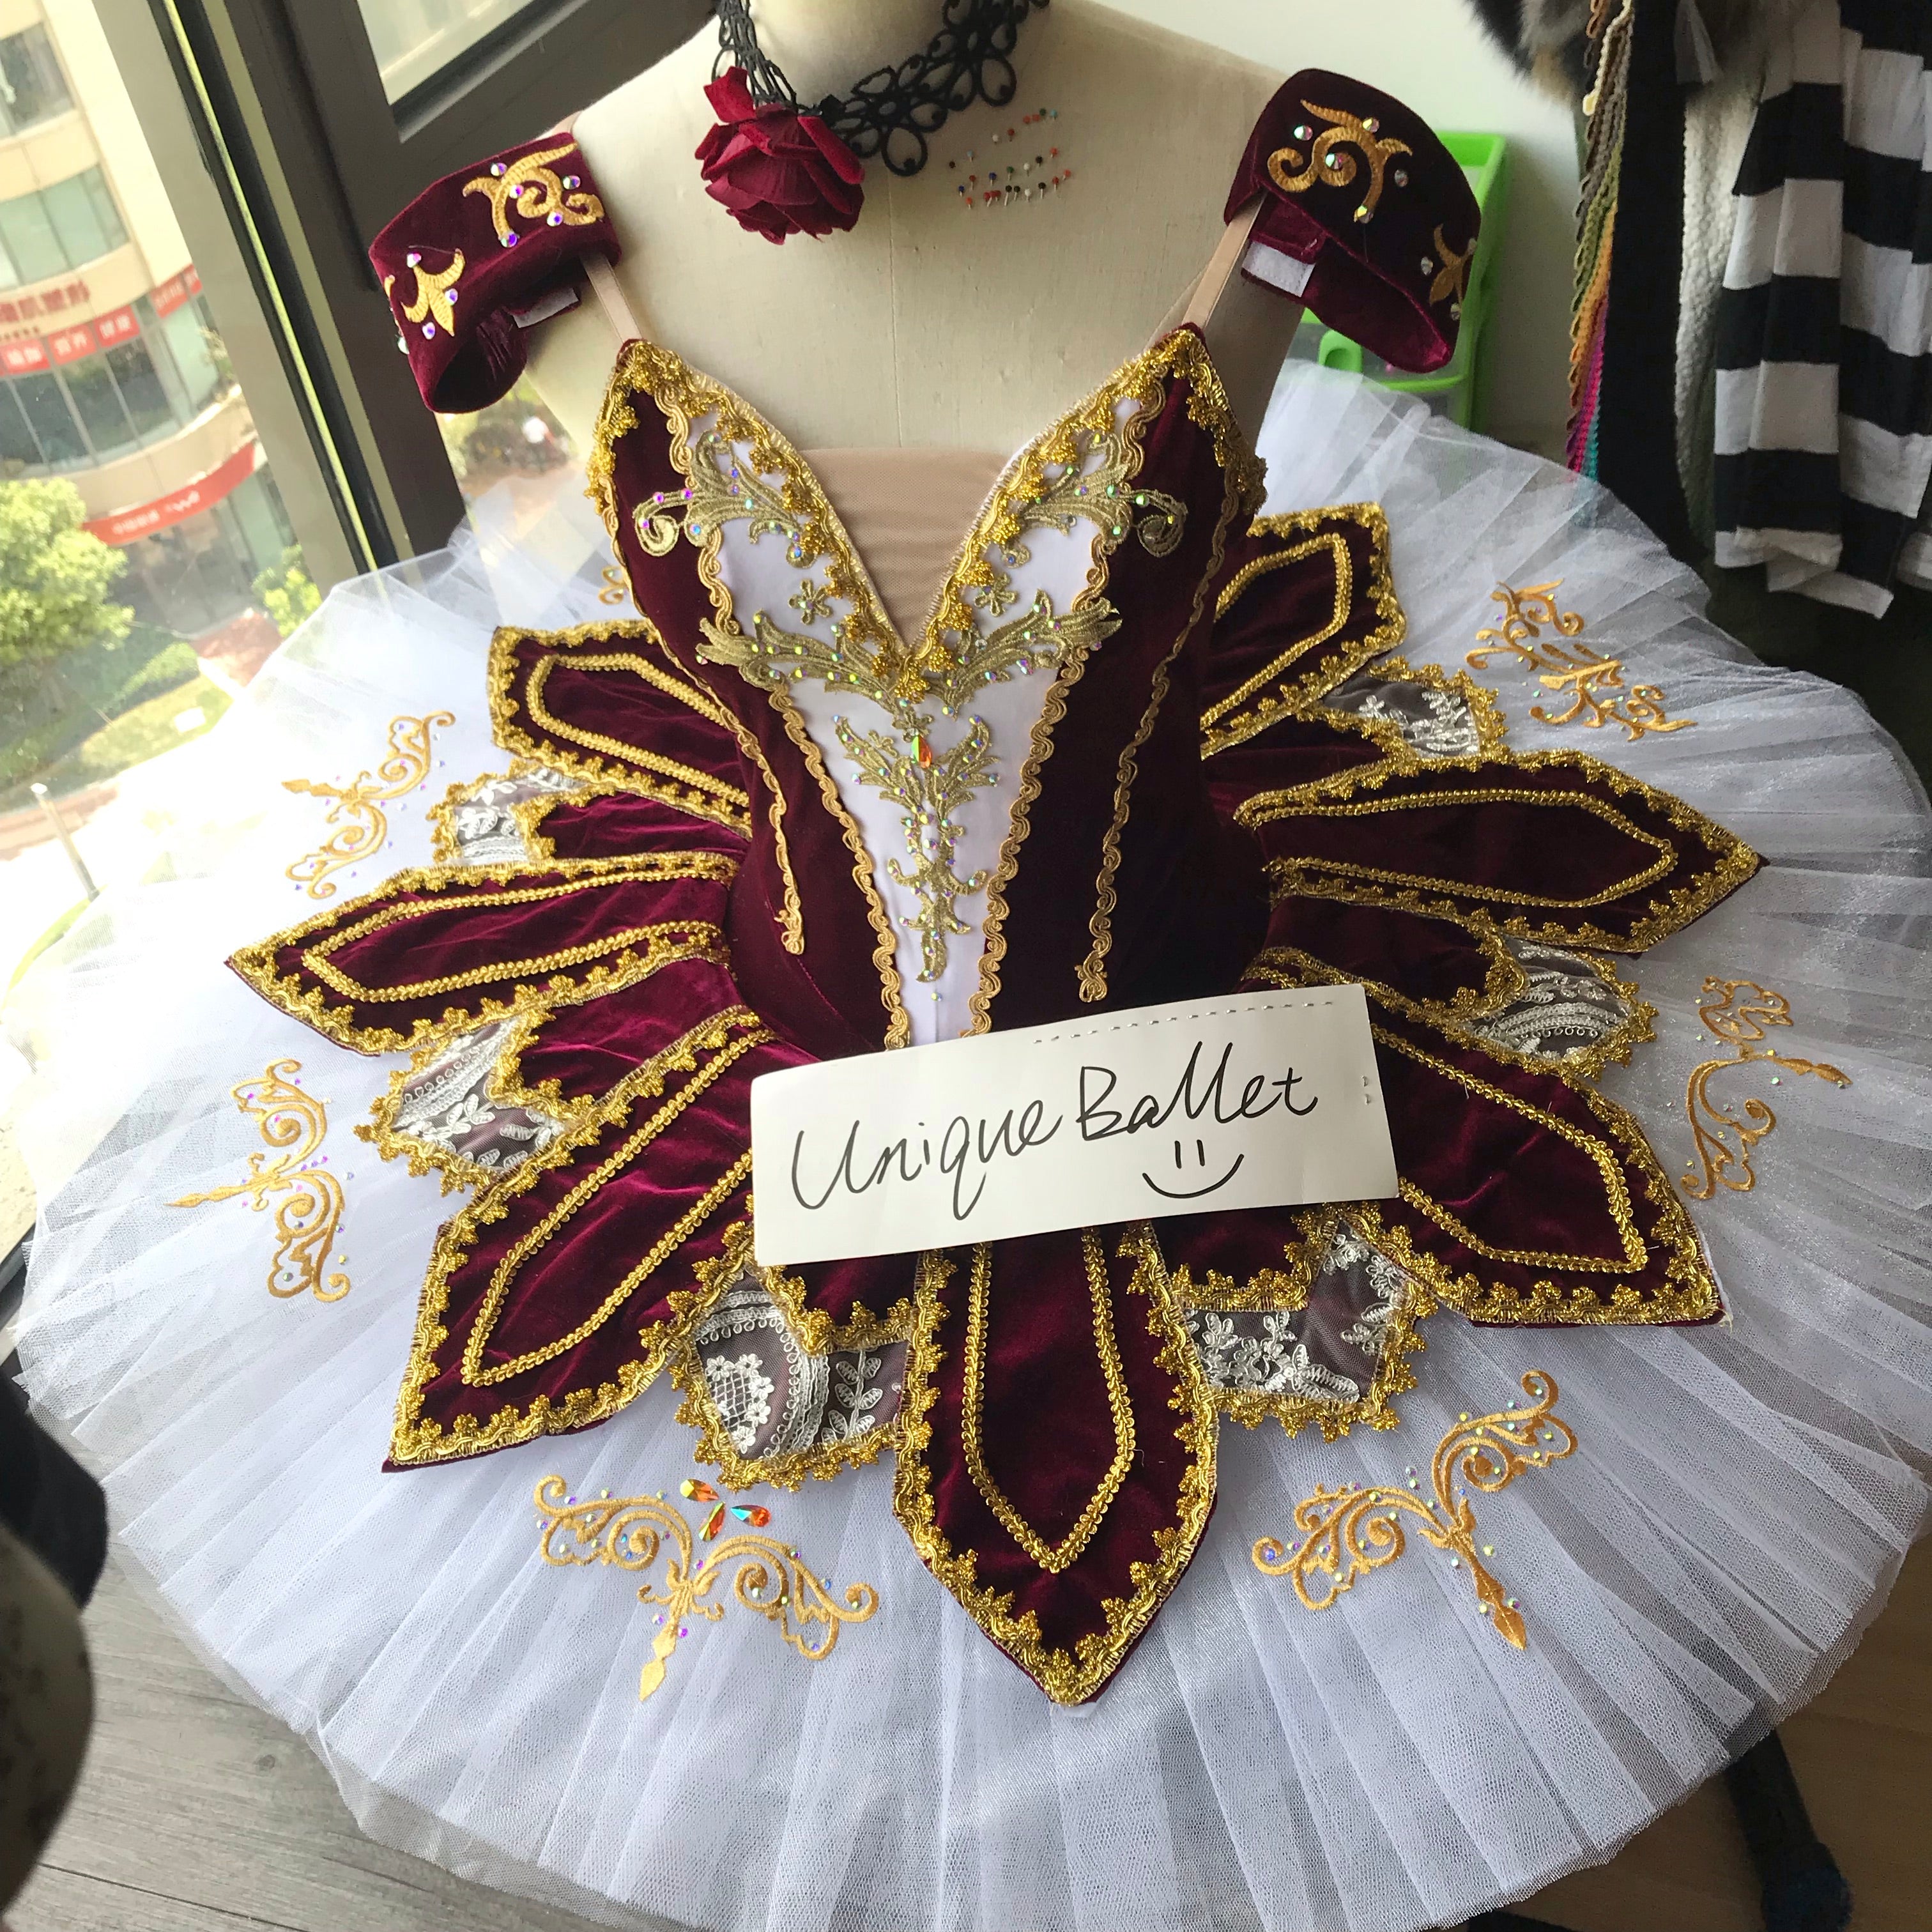 Cost-Effective Professional Red Le Corsaire Medora Act II Classic Ballet TuTu Costume Win Red Golden Trims Ballet Stage Tutu